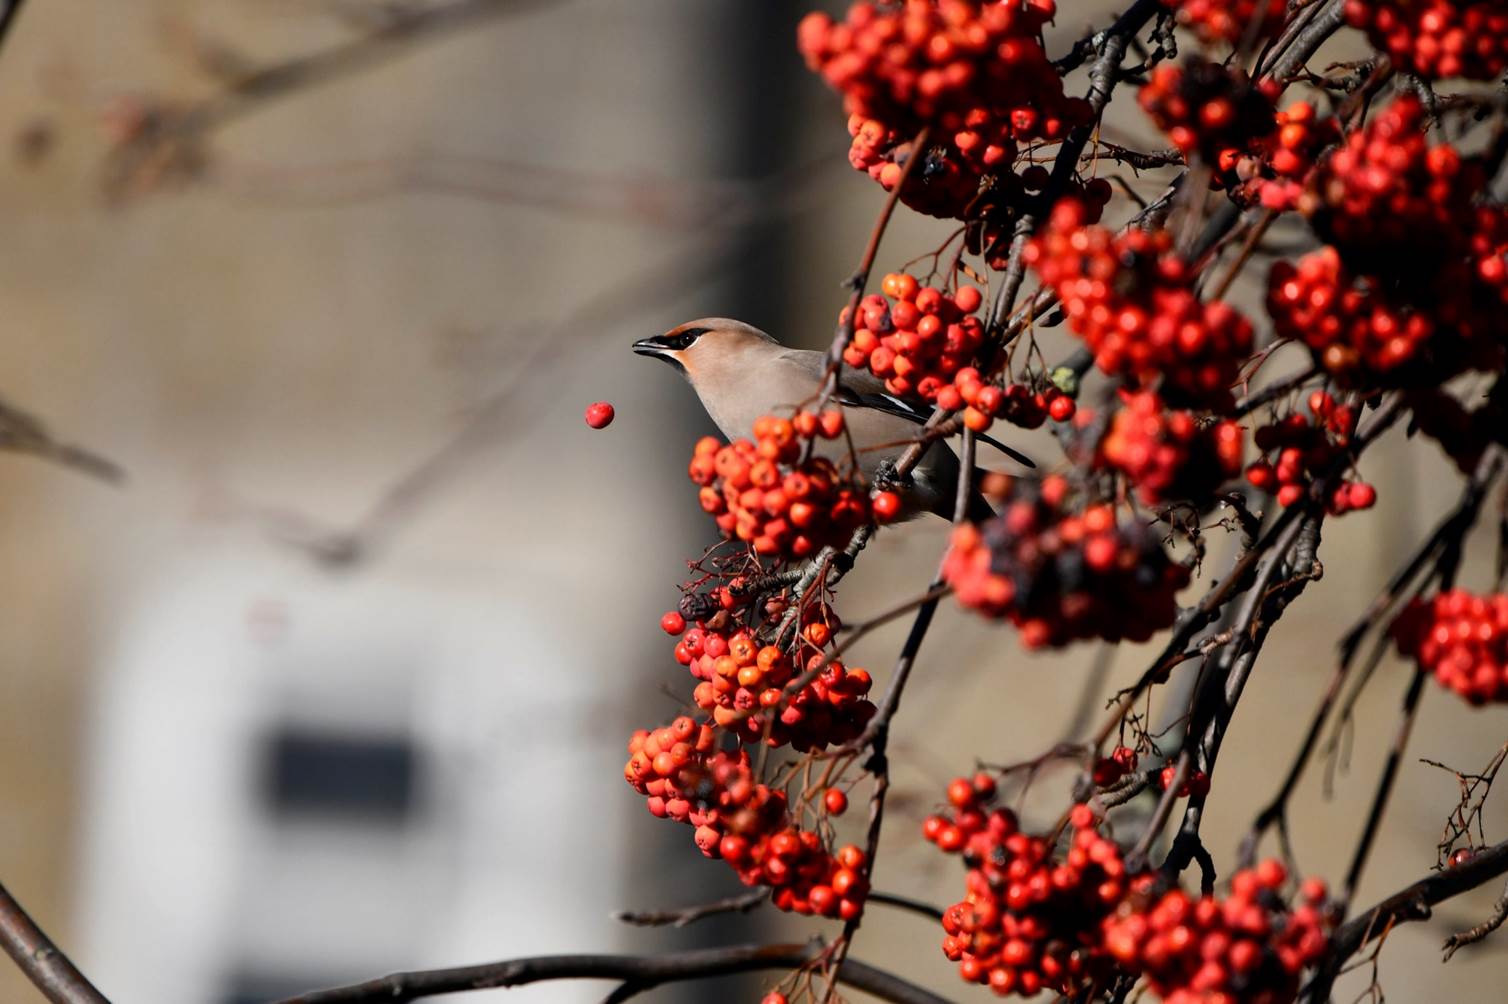 A bird on a tree with berries

Description automatically generated